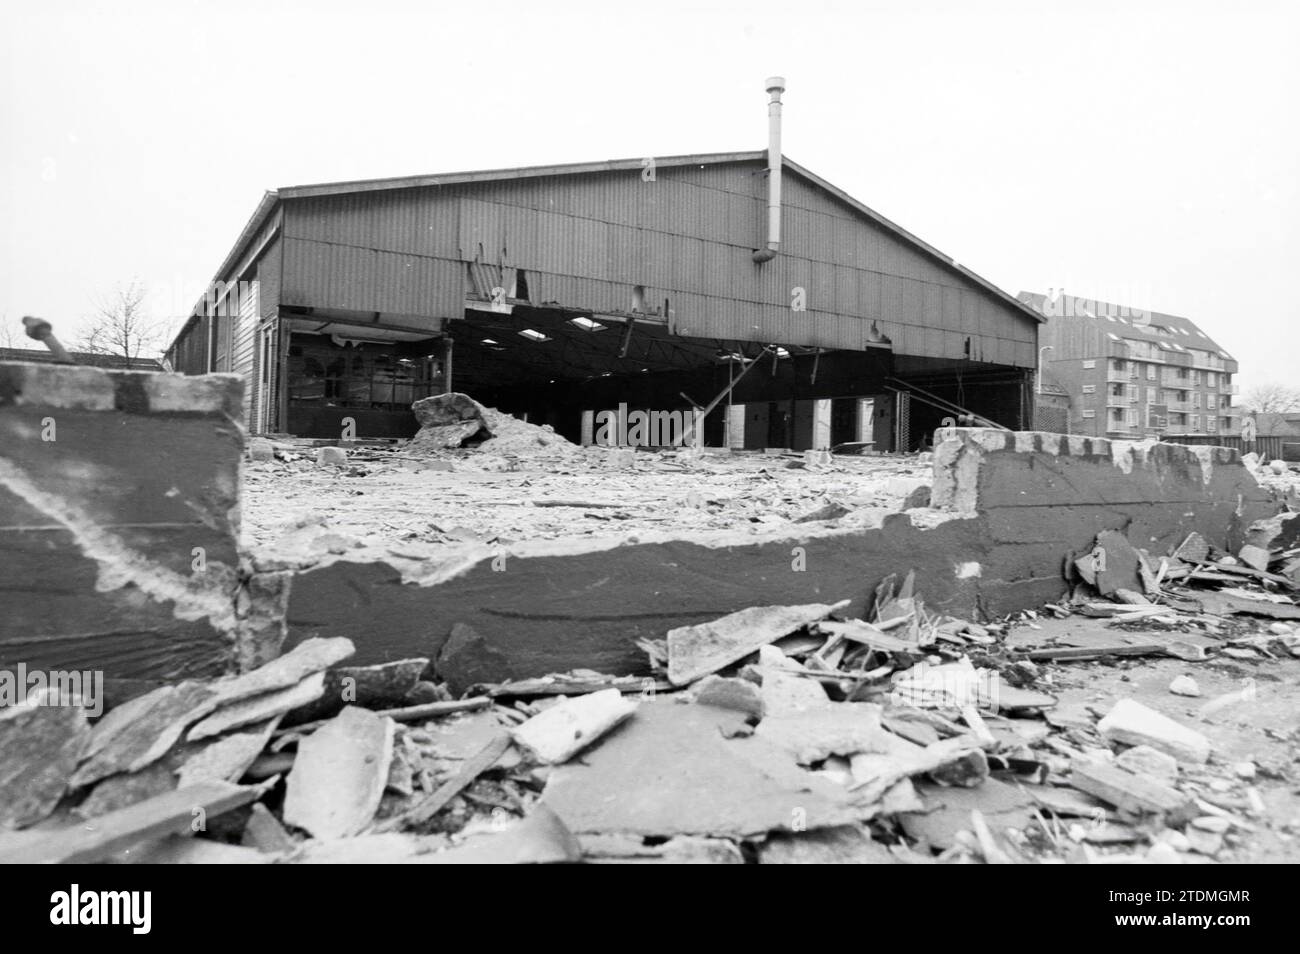 Half-demolished warehouse of Stassen, Whizgle News from the Past, Tailored for the Future. Explore historical narratives, Dutch The Netherlands agency image with a modern perspective, bridging the gap between yesterday's events and tomorrow's insights. A timeless journey shaping the stories that shape our future Stock Photo